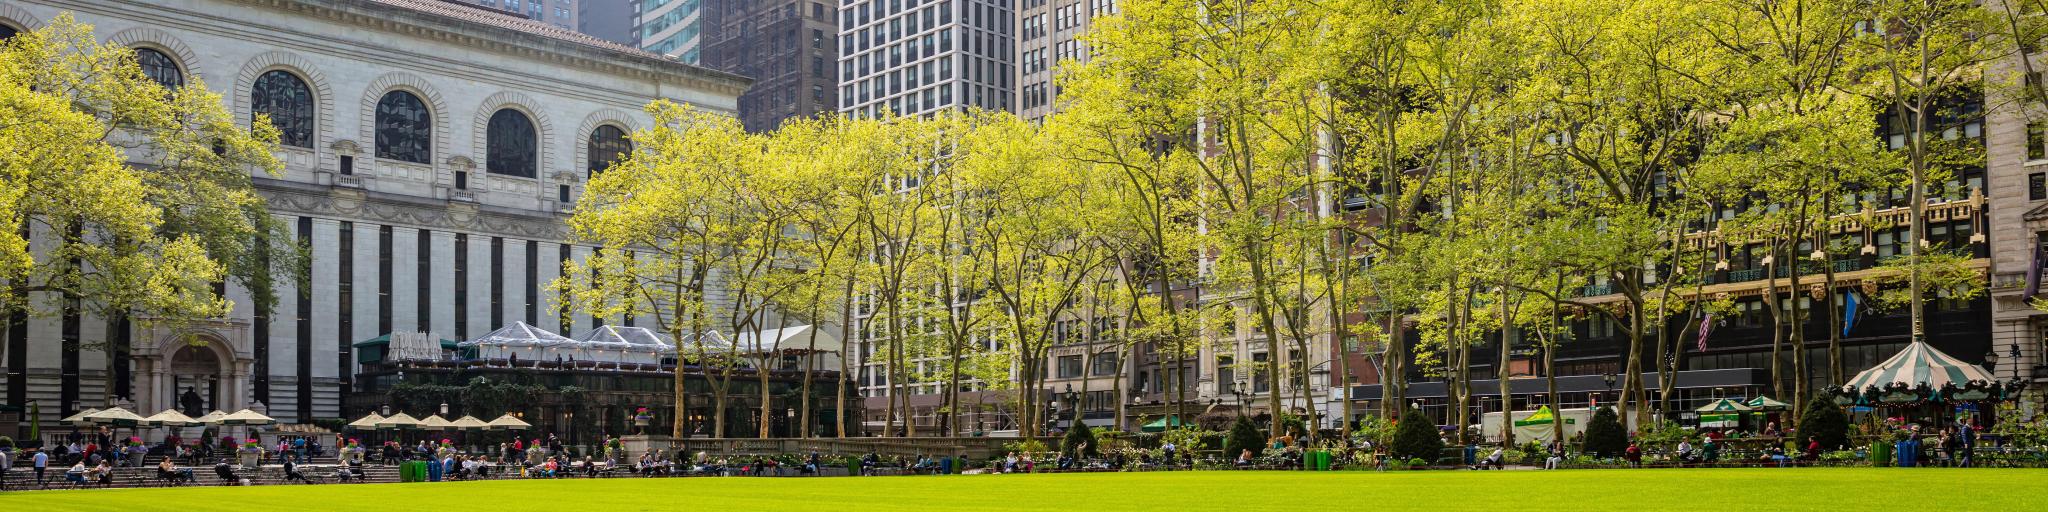 View of Bryant Park, New York without people